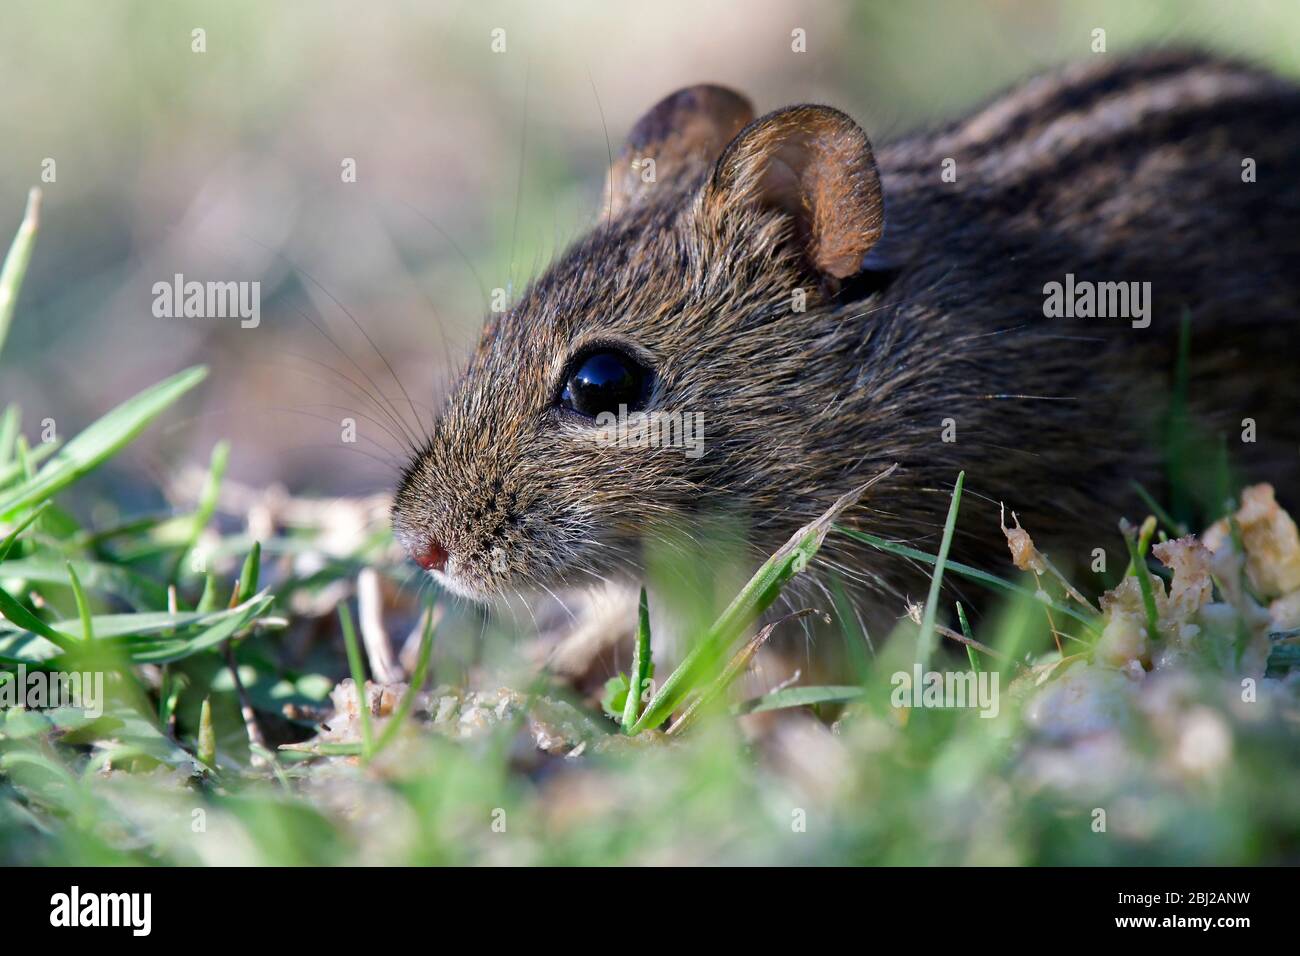 Natural life in Africa. Striped field mouse in green grass Stock Photo